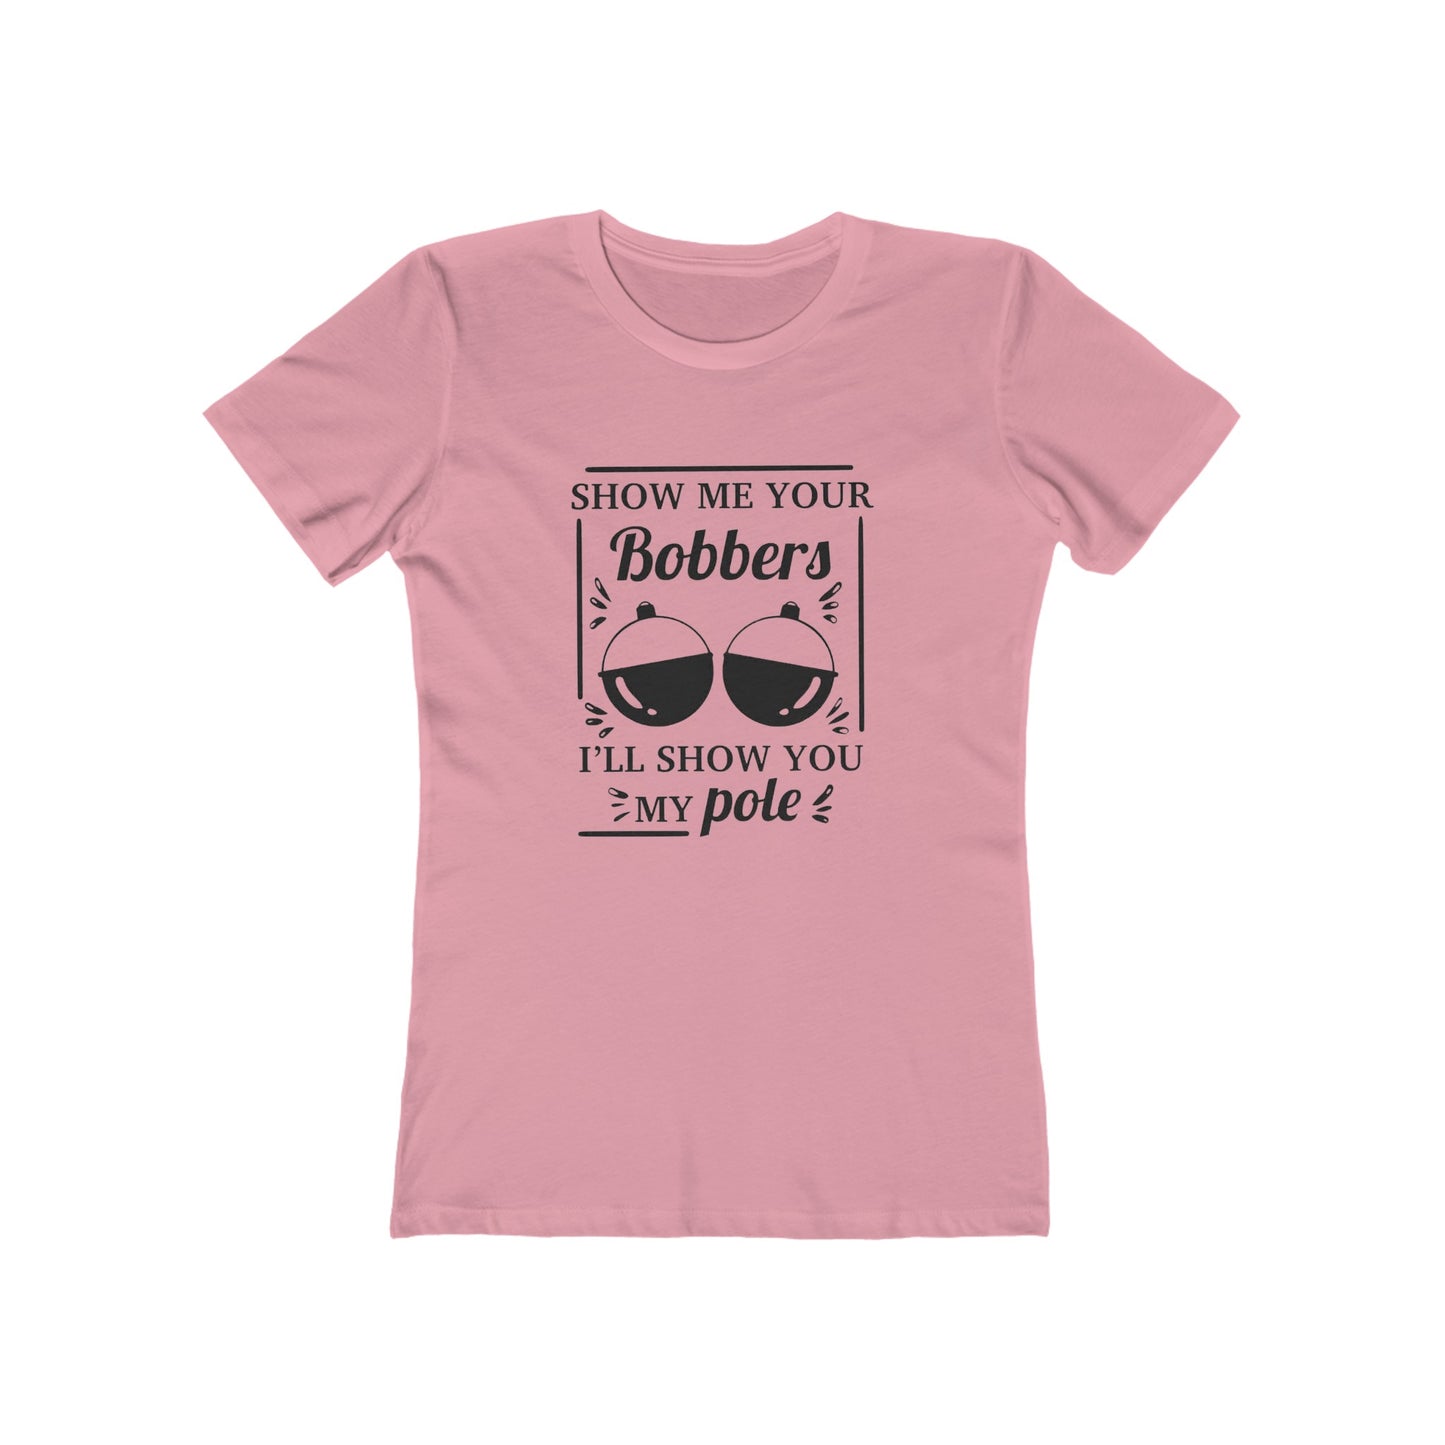 Show me your bobbers, I'll show you my pole - Women's T-shirt